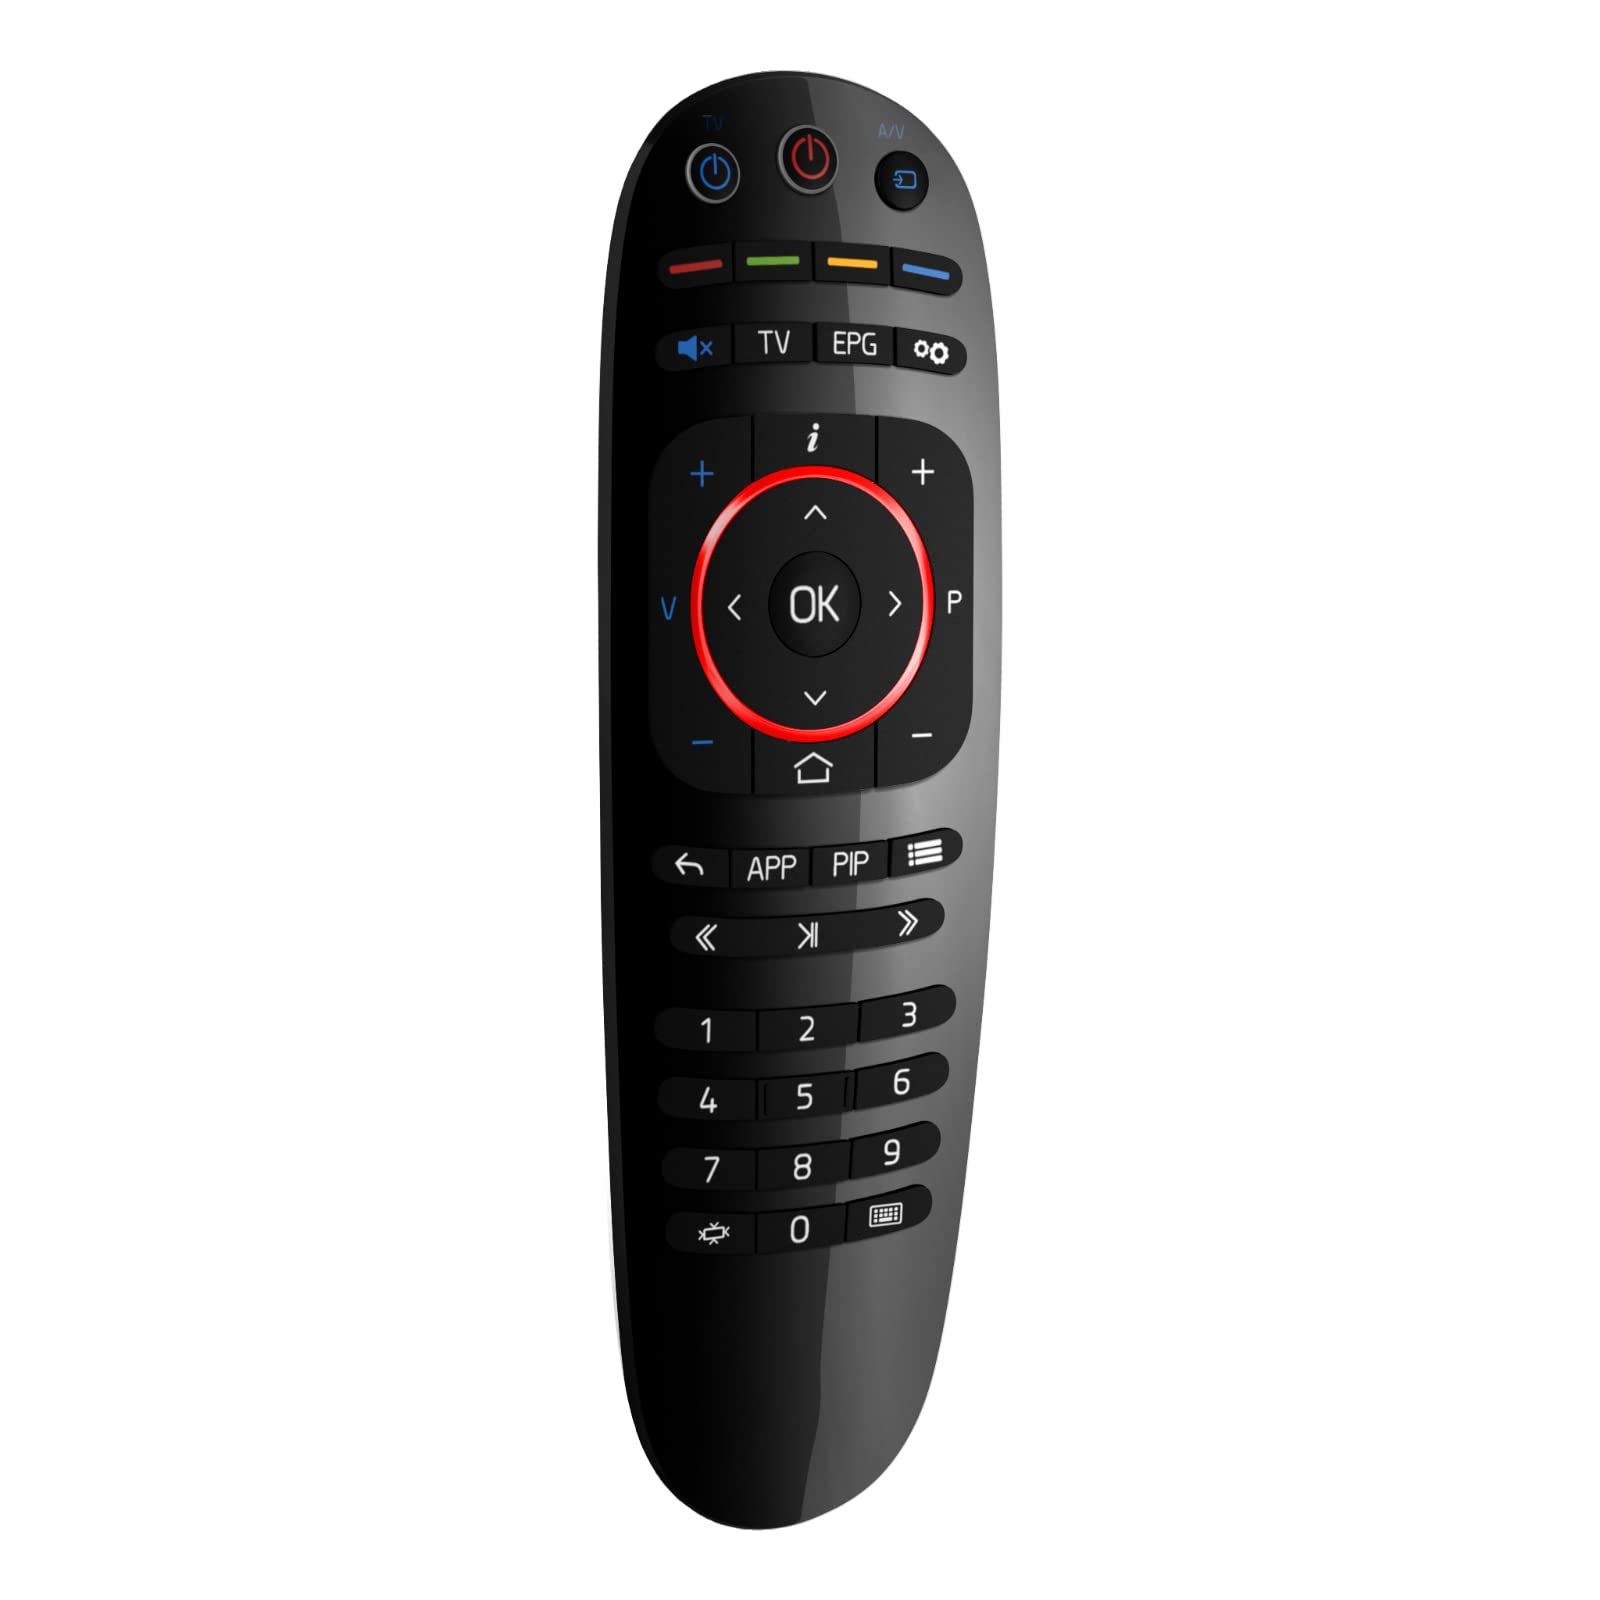 2022 Genuine Mag 524W3 4K, Built-in Dual Band 2.4G/5G WiFi, Free Remote Control,HDMI Cable and US Plug - Mag524W3 - Mag 524 W3 - Replacement for 324w2 and 424W3